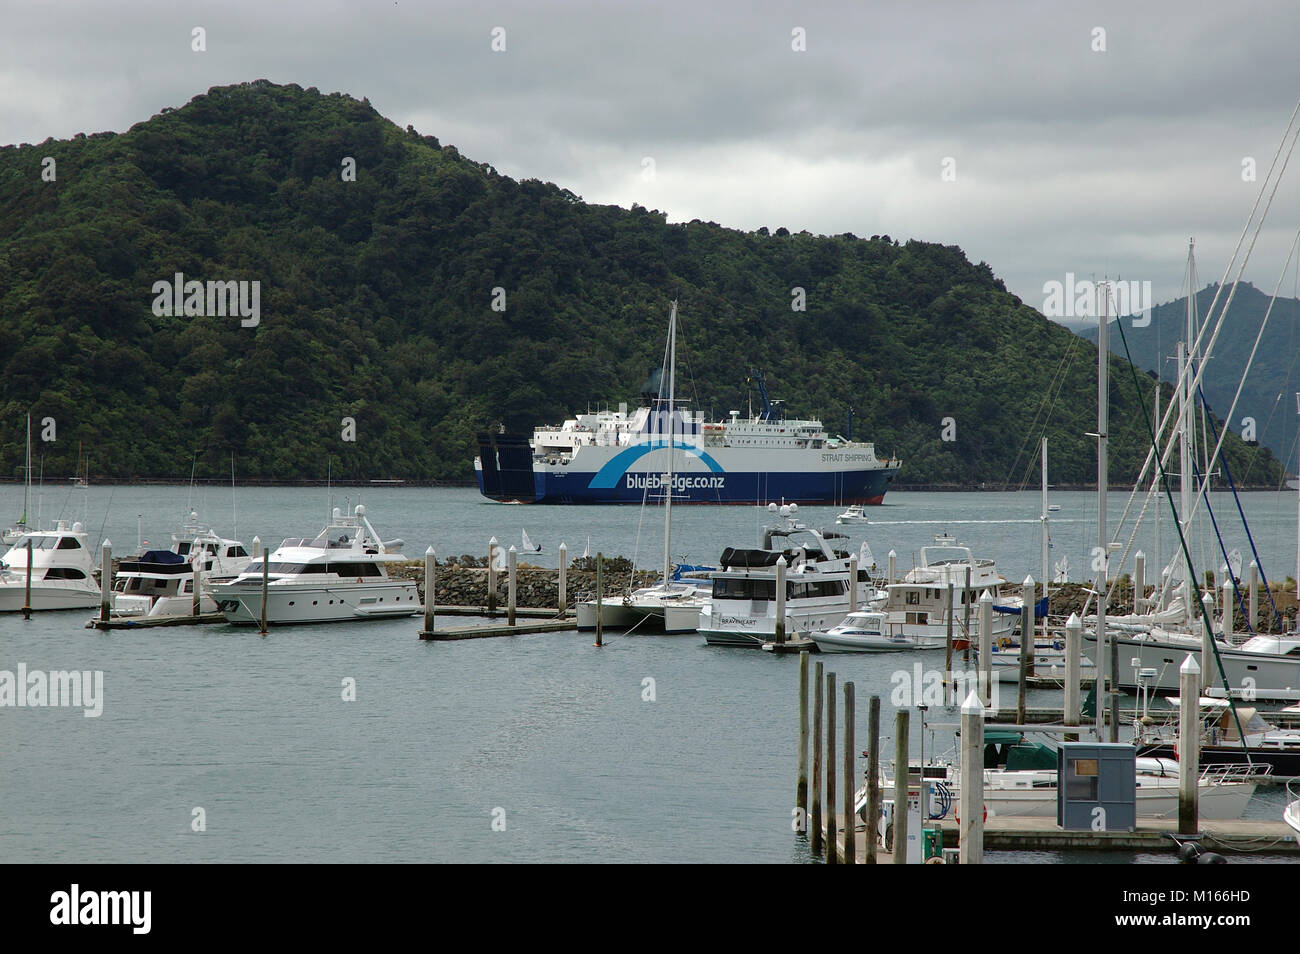 Picton Ferry, Picton, South Island, New Zealand, Queen Charlotte Sound. NZ Stock Photo